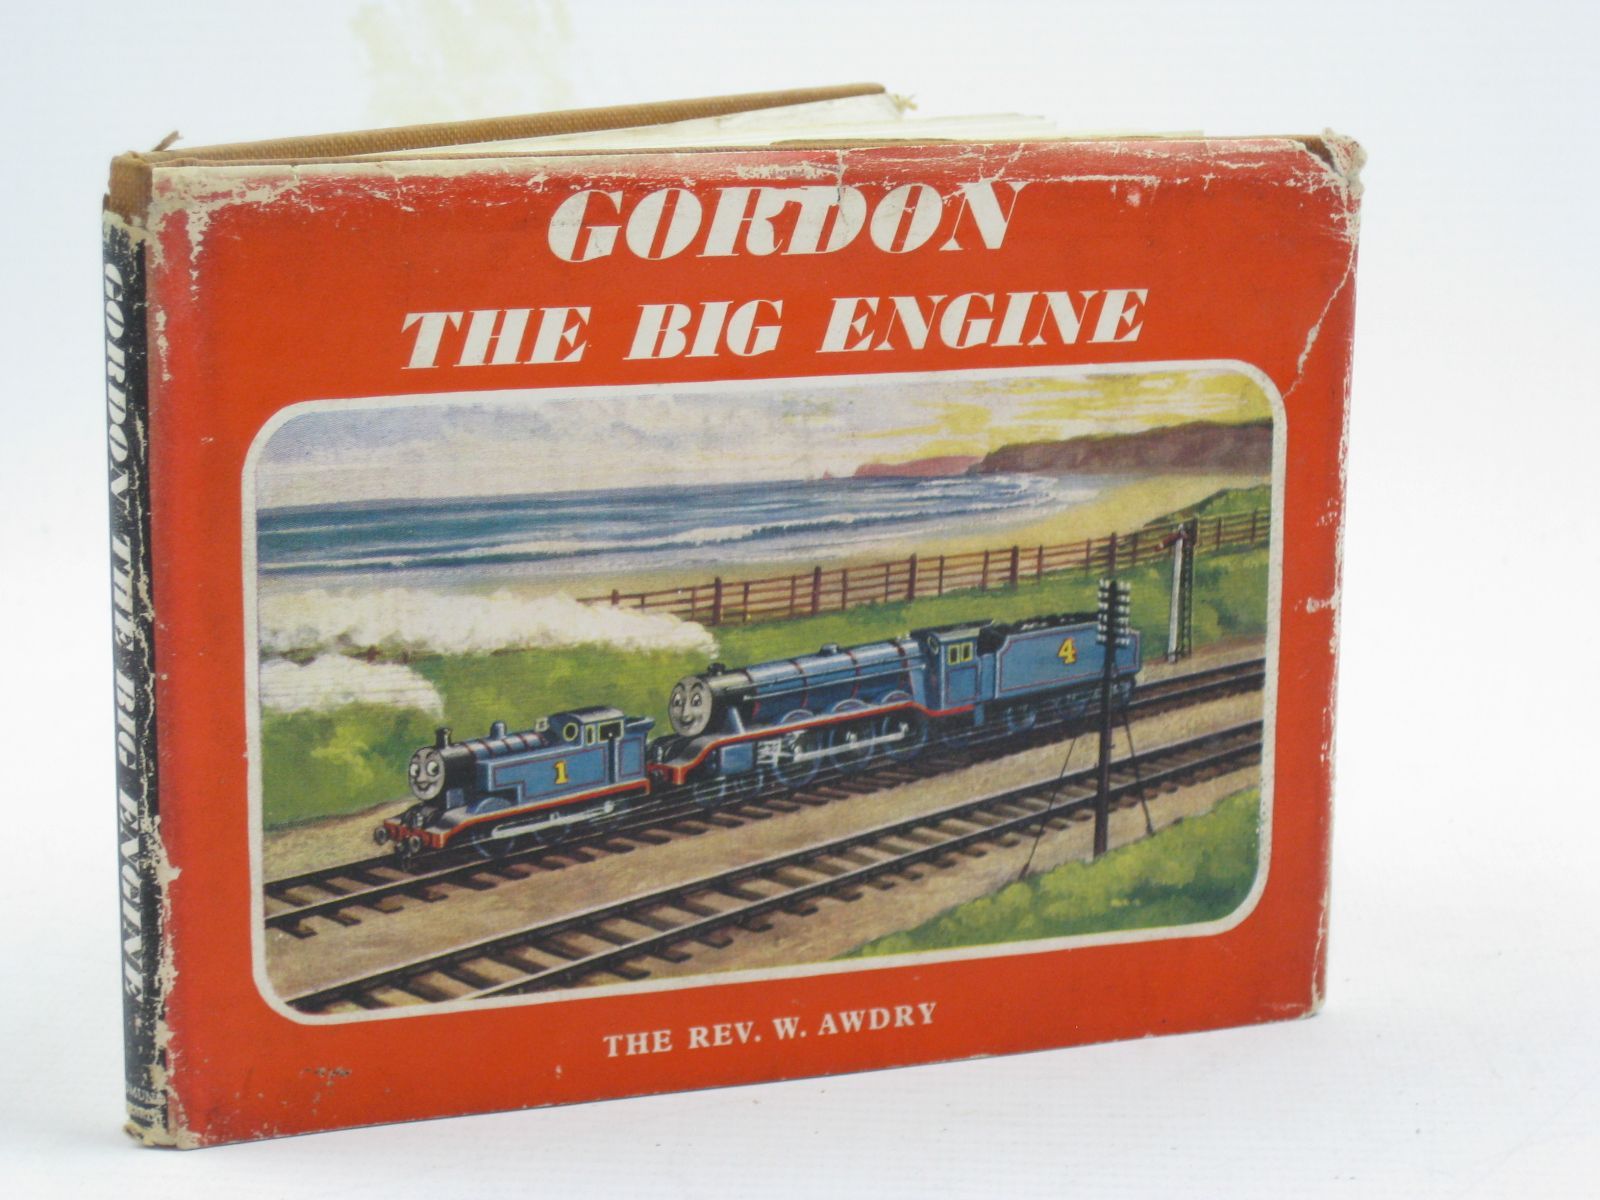 Photo of GORDON THE BIG ENGINE written by Awdry, Rev. W. illustrated by Dalby, C. Reginald published by Edmund Ward Ltd. (STOCK CODE: 1316757)  for sale by Stella & Rose's Books